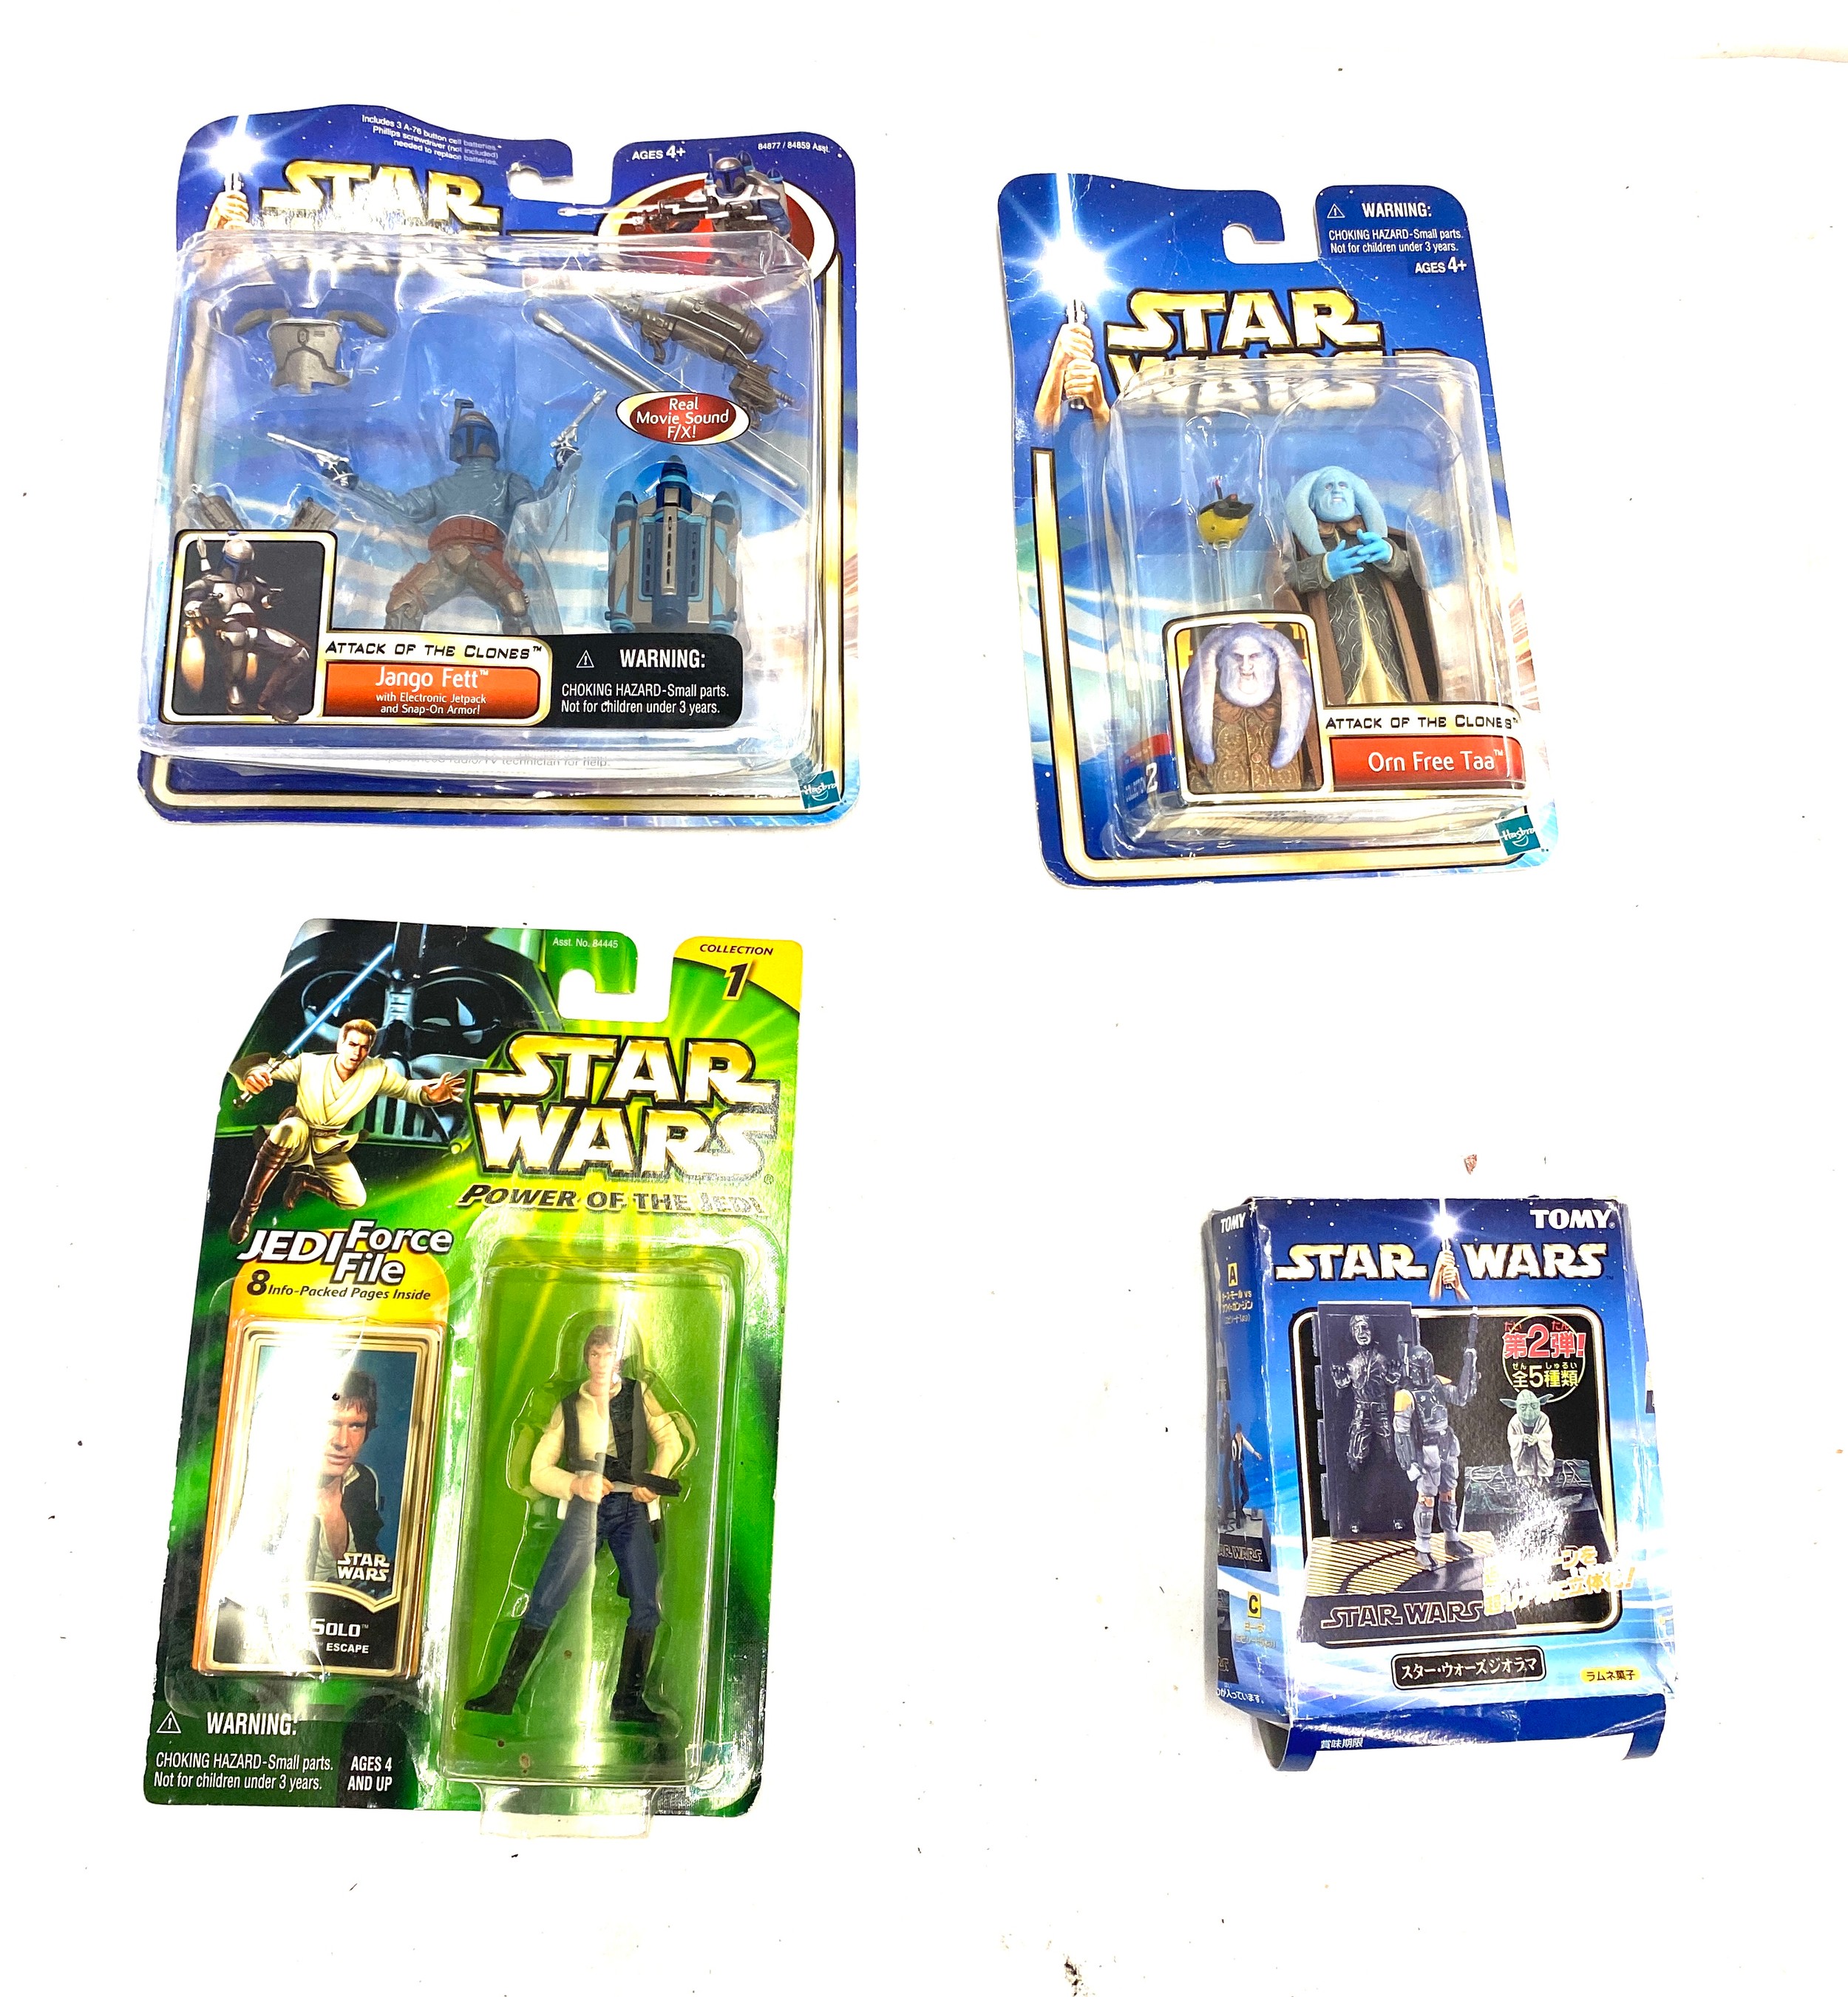 Hasbro boxed Star Wars to include Jango Fett, Orn Free Taa, Power of the Jedi, Tomy Star Wars - Image 7 of 7